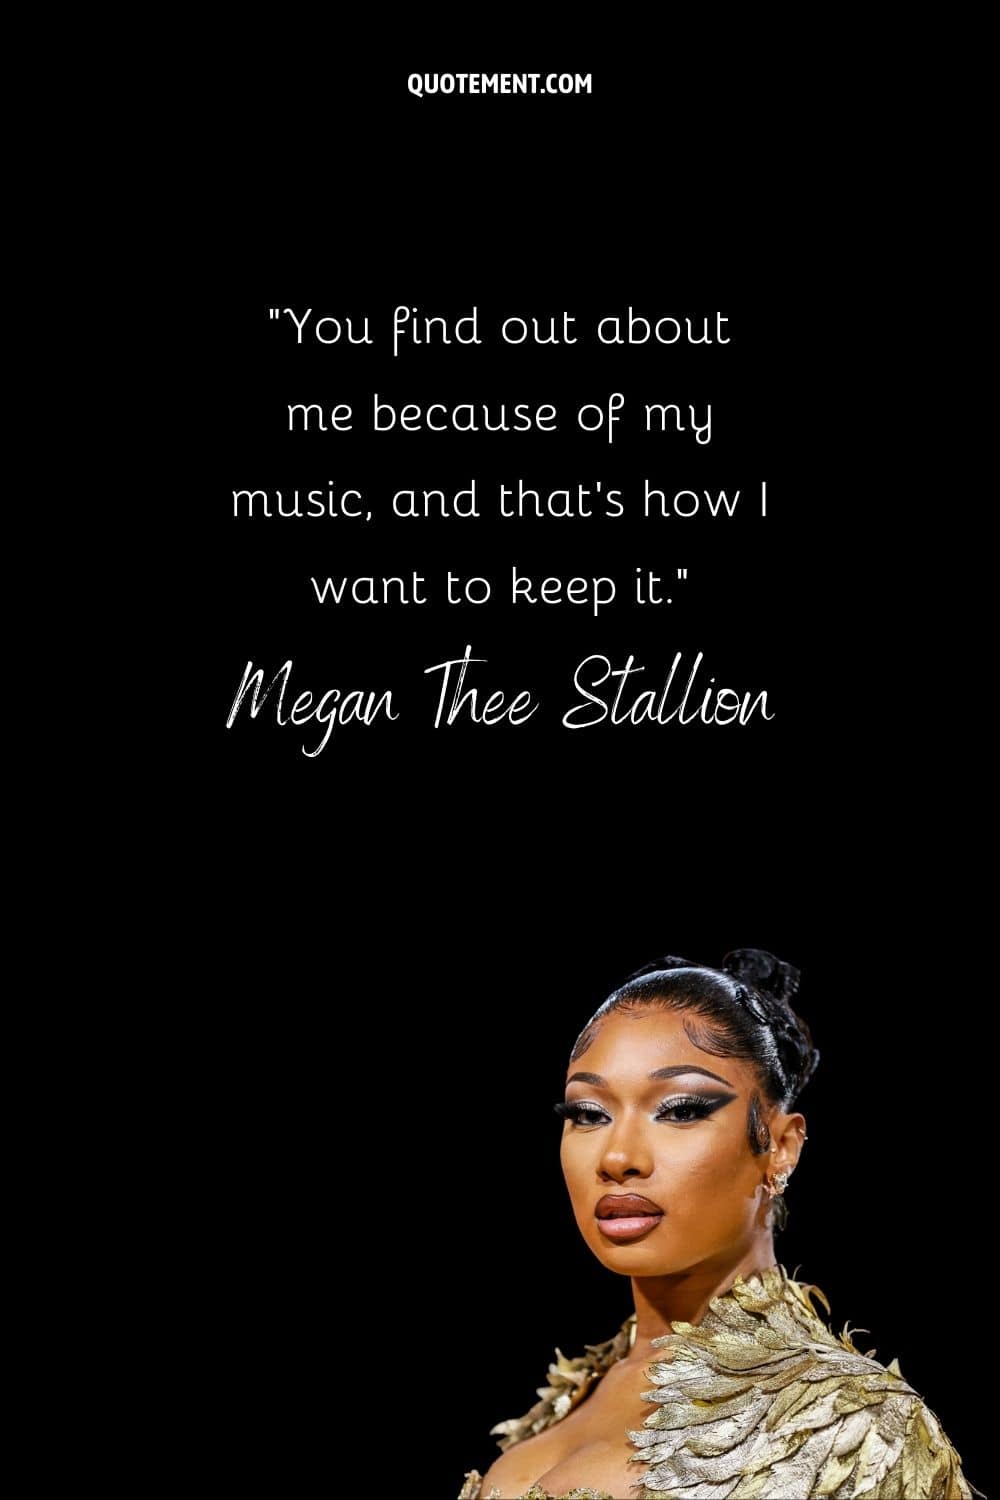 “You find out about me because of my music, and that's how I want to keep it.” — Megan Thee Stallion